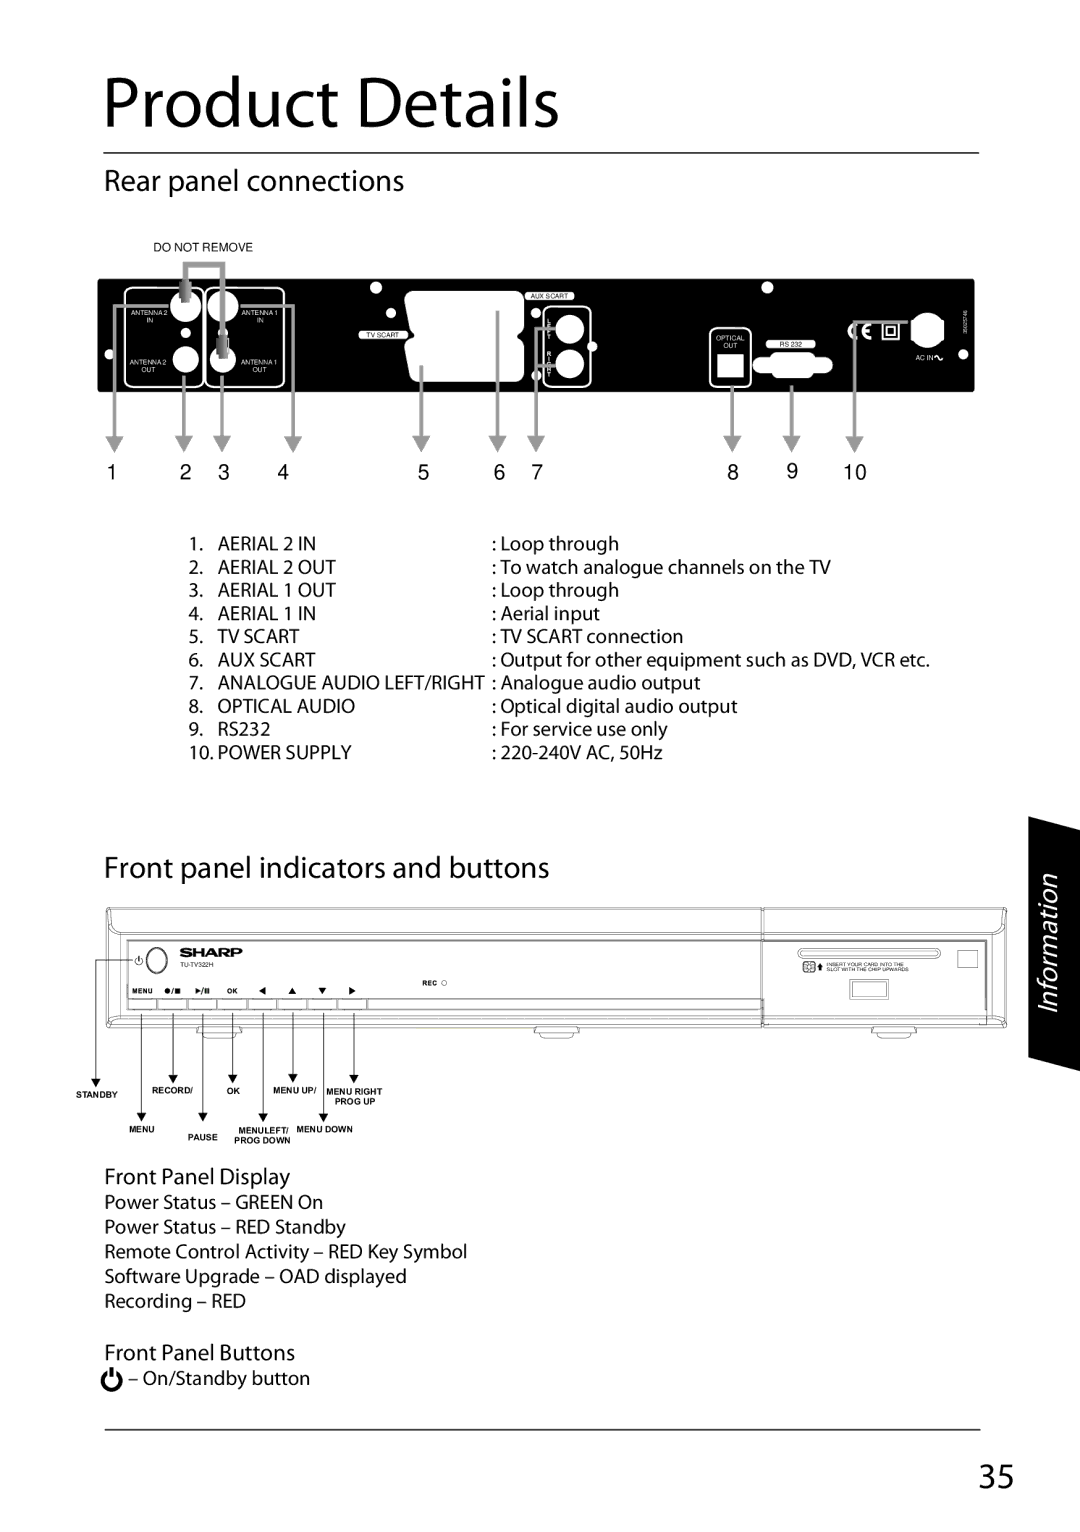 Sharp TU-TV322H operation manual Product Details, Rear panel connections, Front panel indicators and buttons 